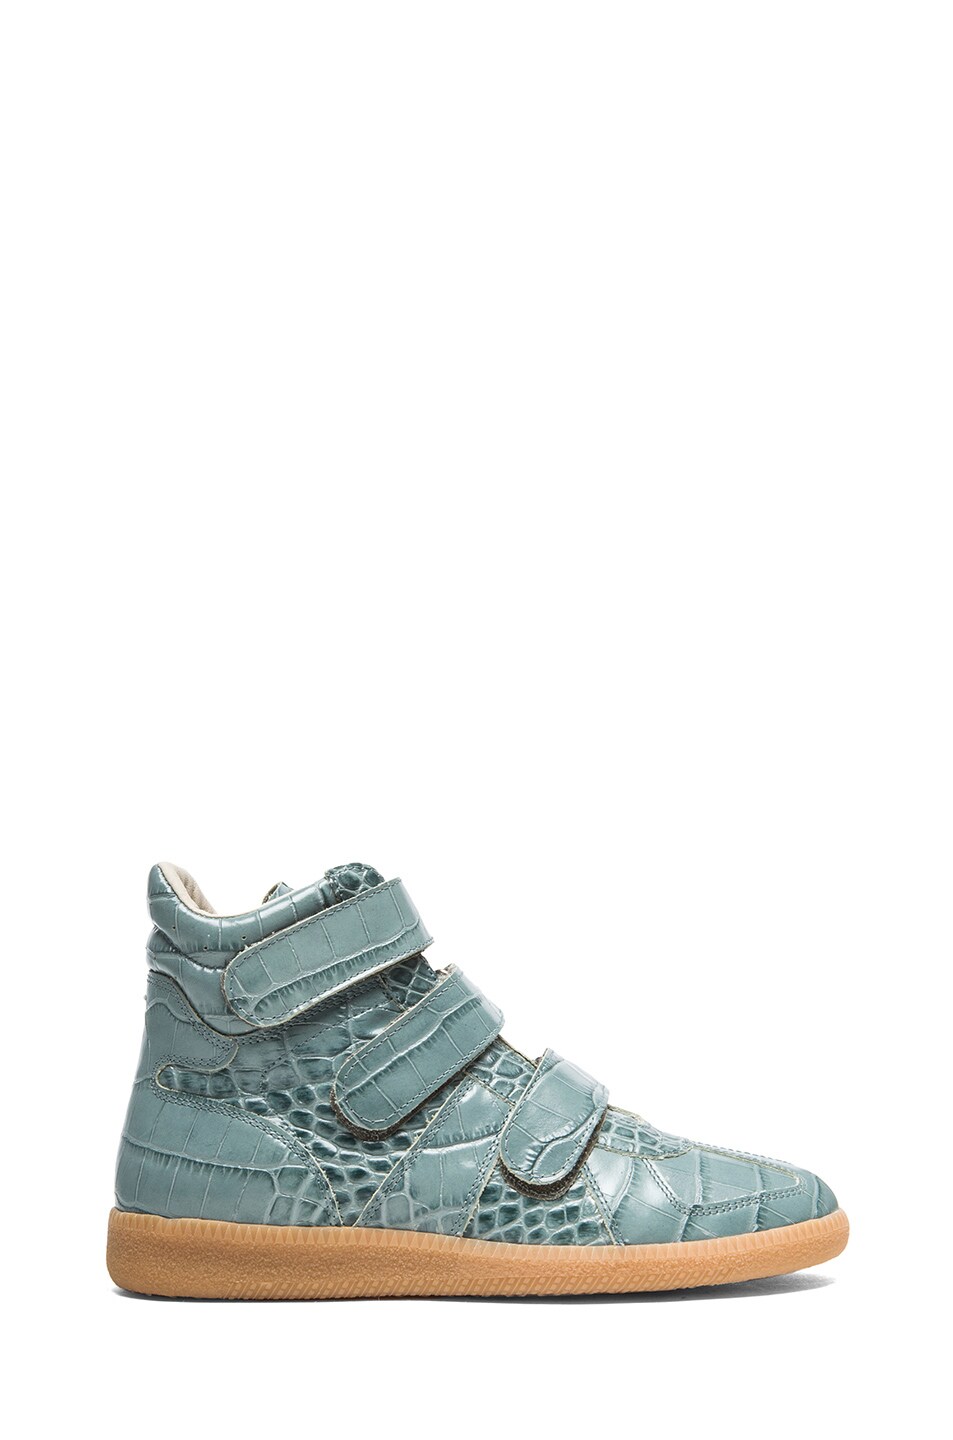 Image 1 of Maison Margiela Crocodile Print 3 Strap High Top Leather Sneakers in Sage